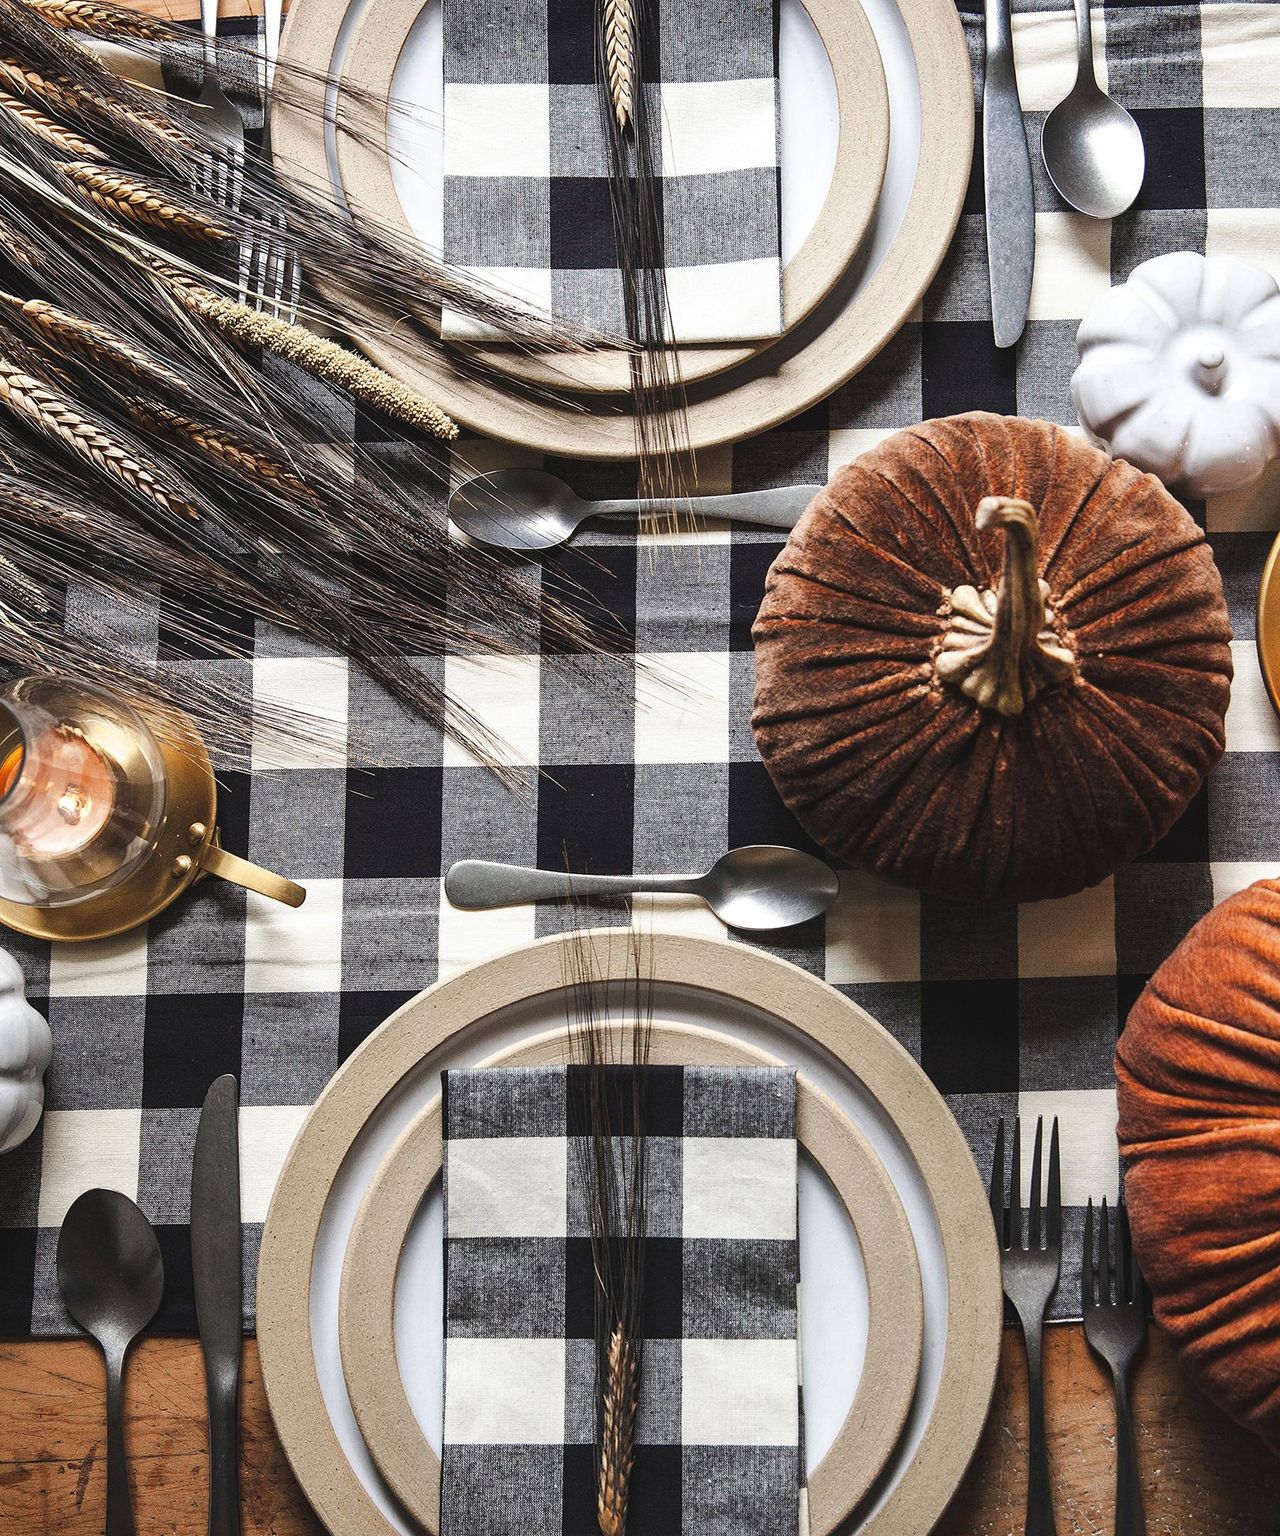 Our favorite finds from West Elm's Thanksgiving collection